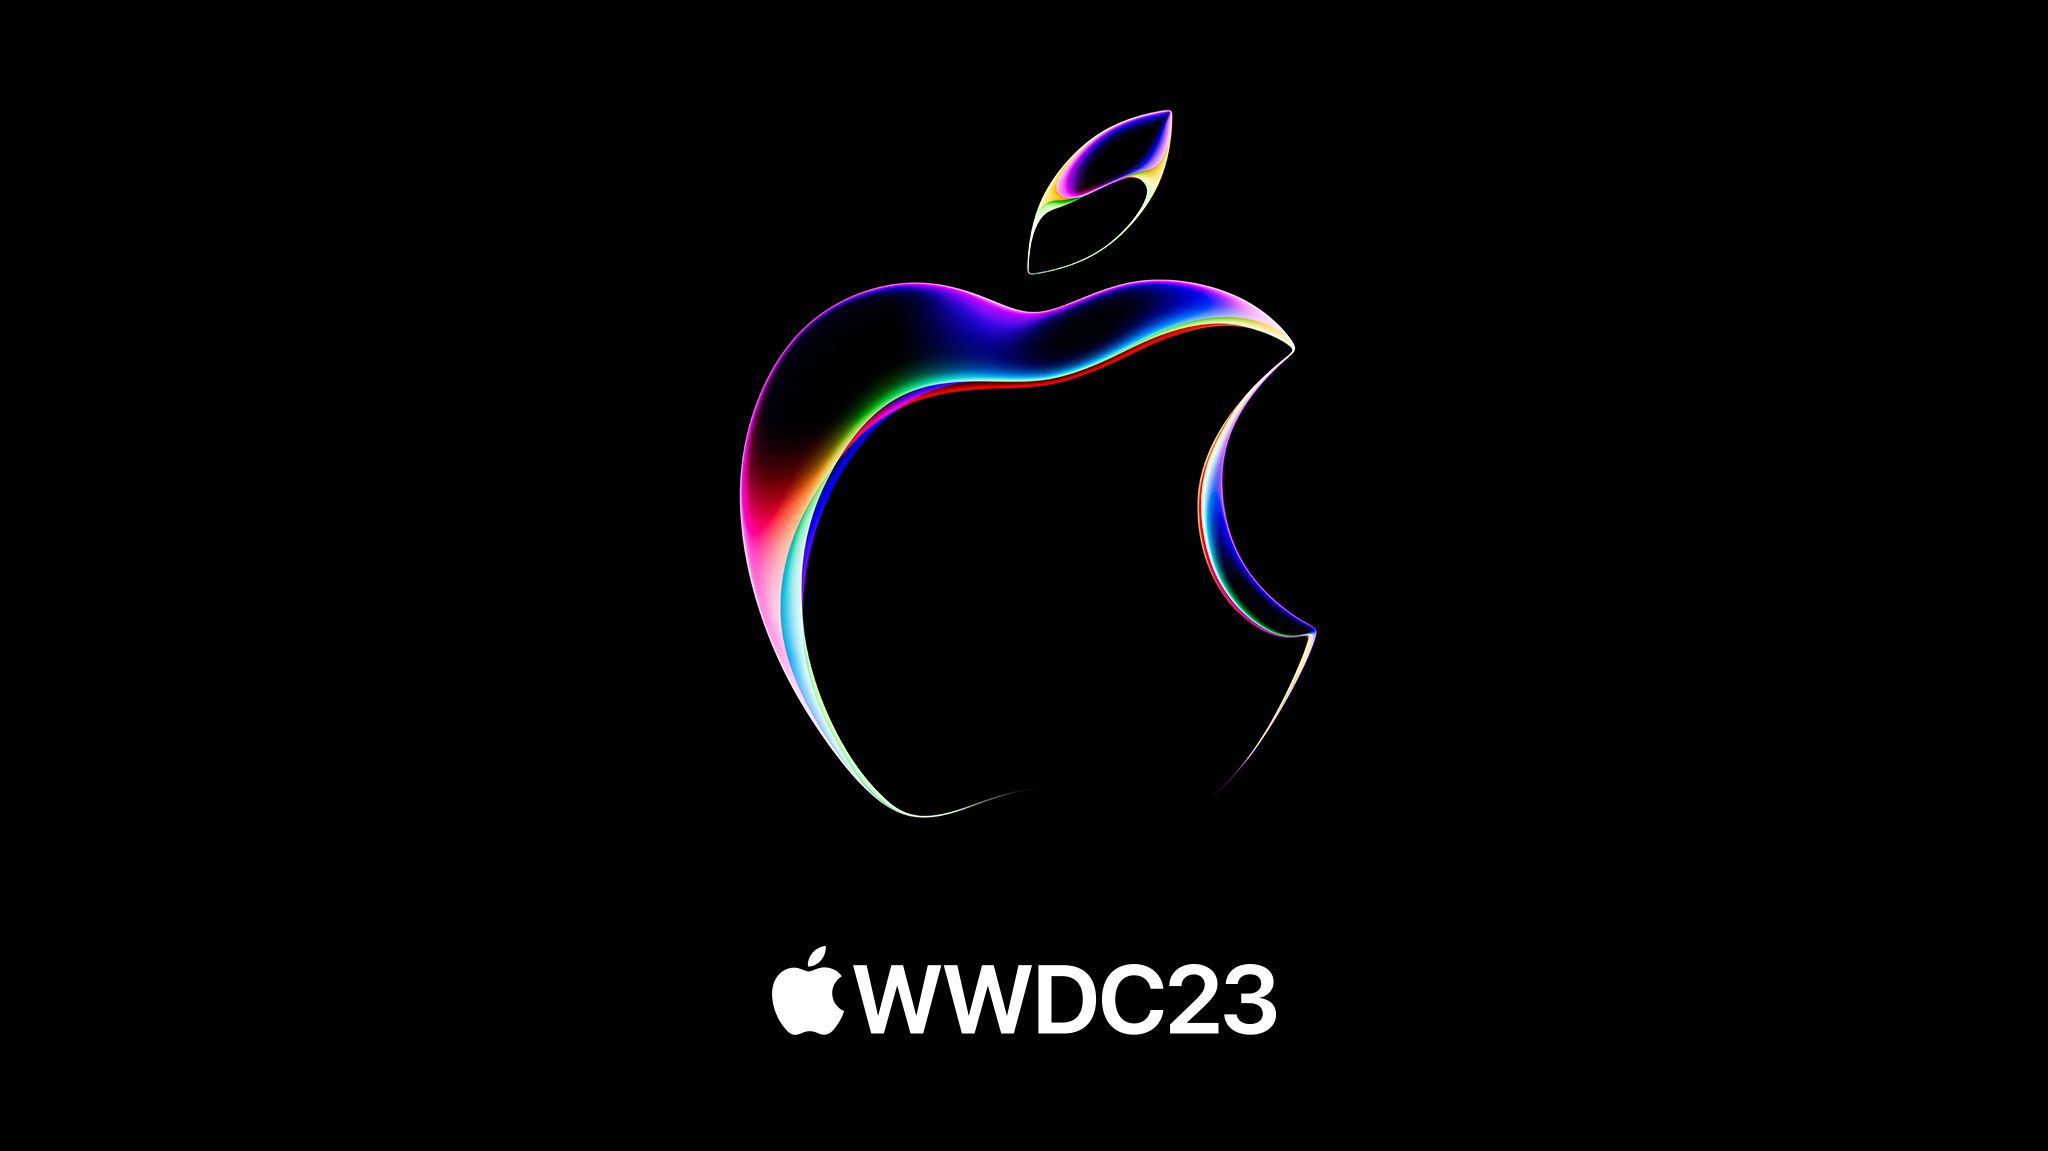 Exciting Expectations: Apple's WWDC 2021 Promises Augmented Reality, Software Updates, and More!